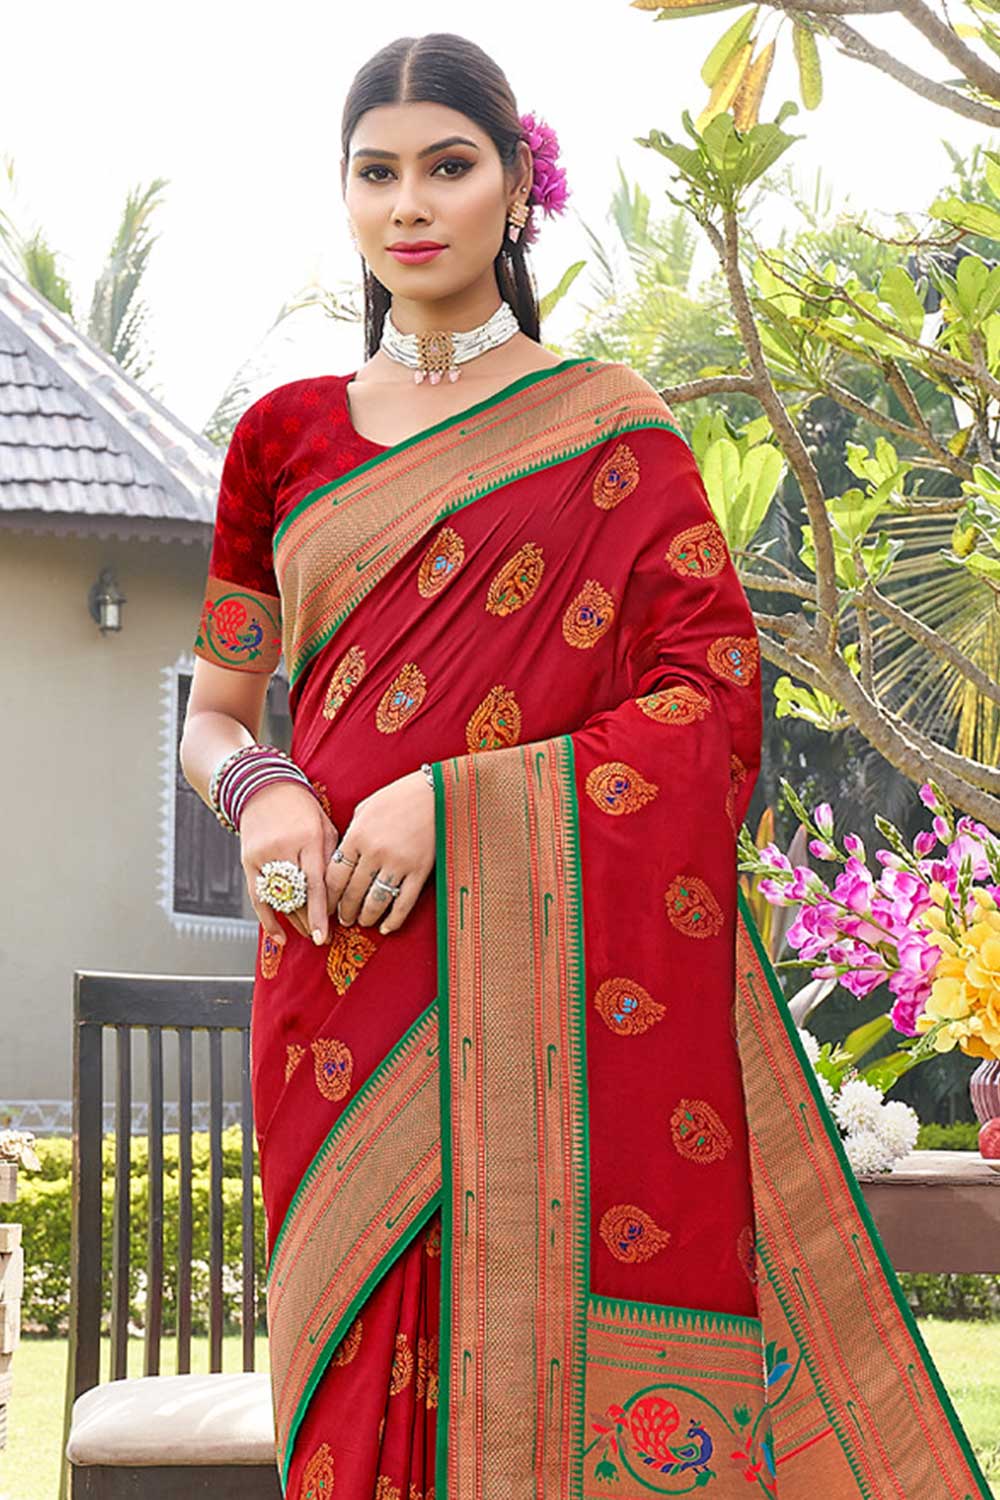 Shop Mitra Red Paithani Art Silk One Minute Saree at best offer at our  Store - One Minute Saree